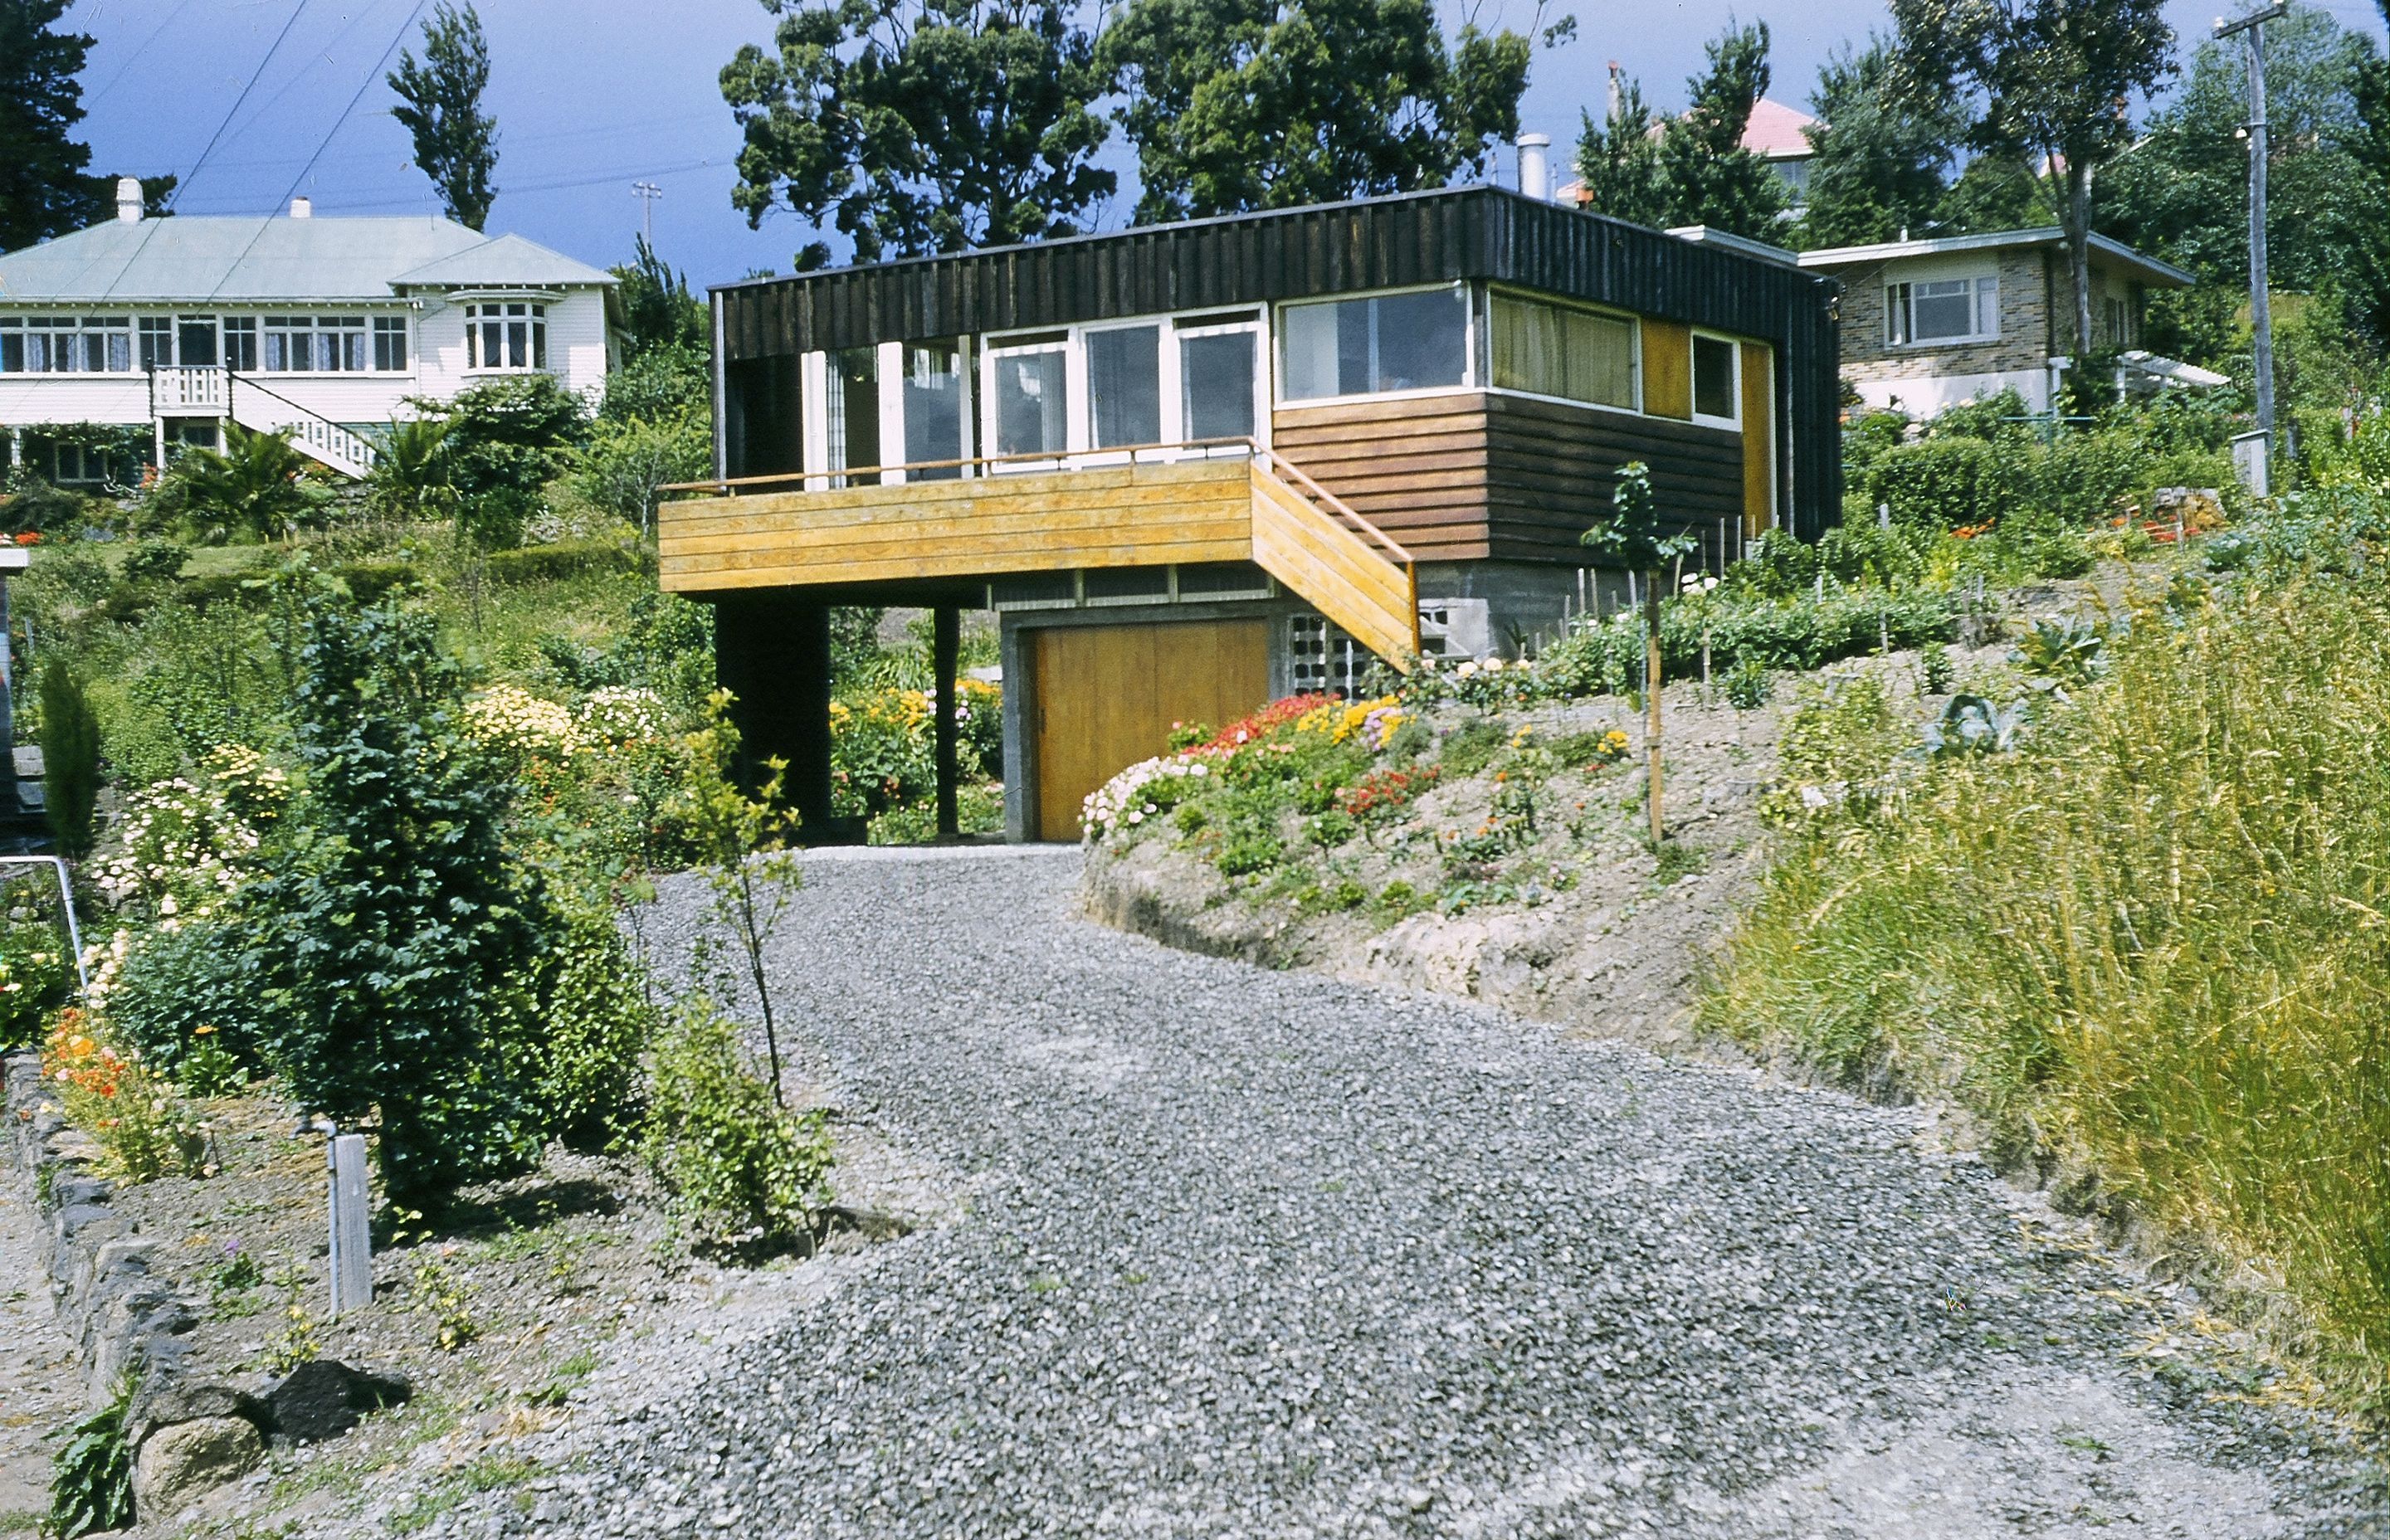 The original Don Cowey house circa 1957, four years after he designed and built it for his parents.